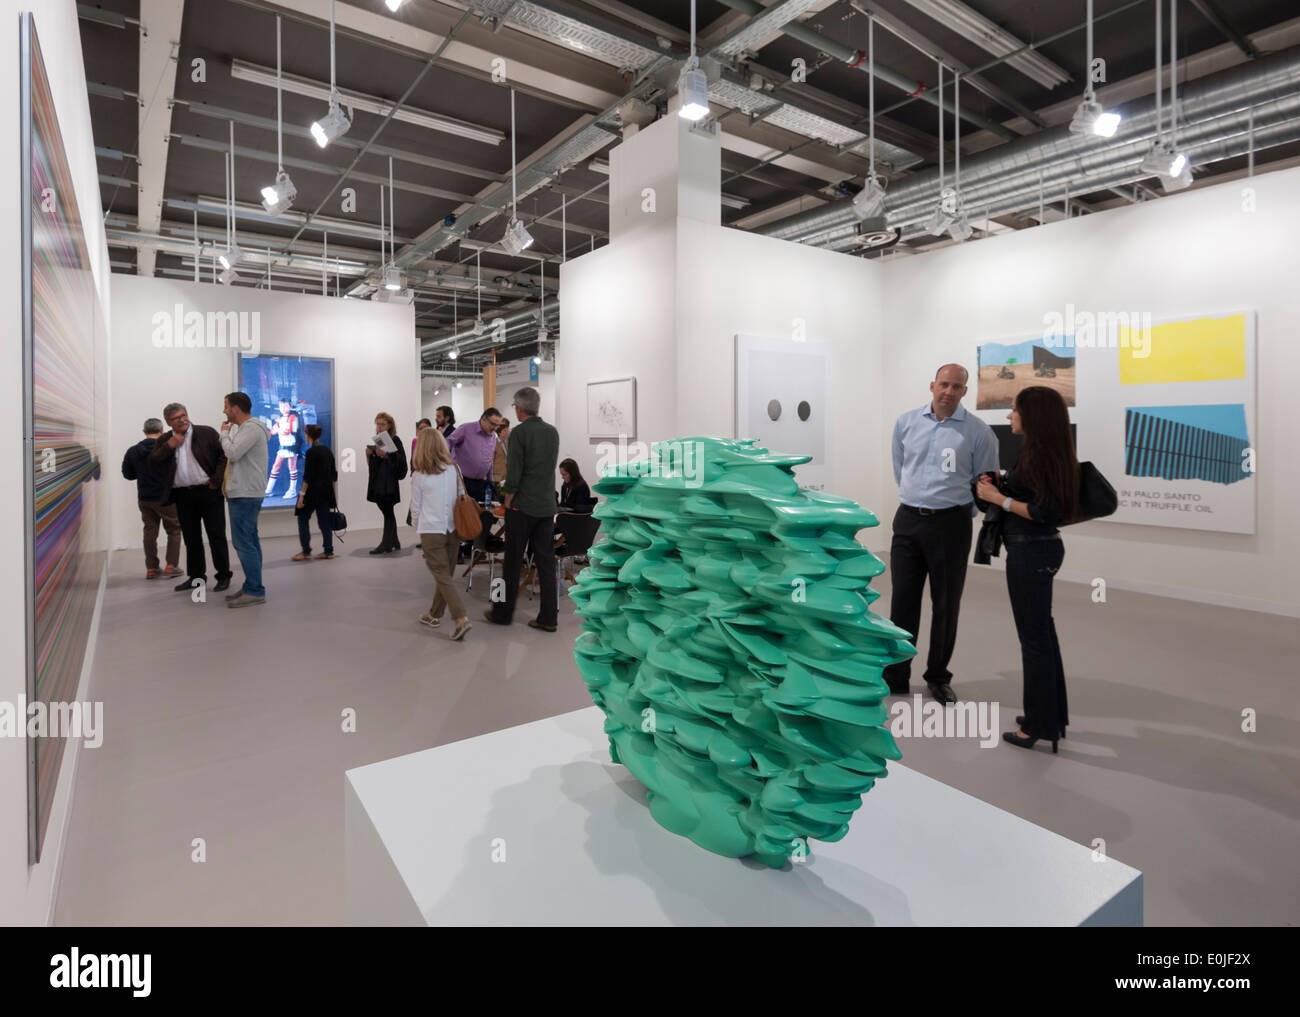 Visitors are passing by an artwork exhibited at the Art Basel 2013 in Basel, Switzerland. Stock Photo